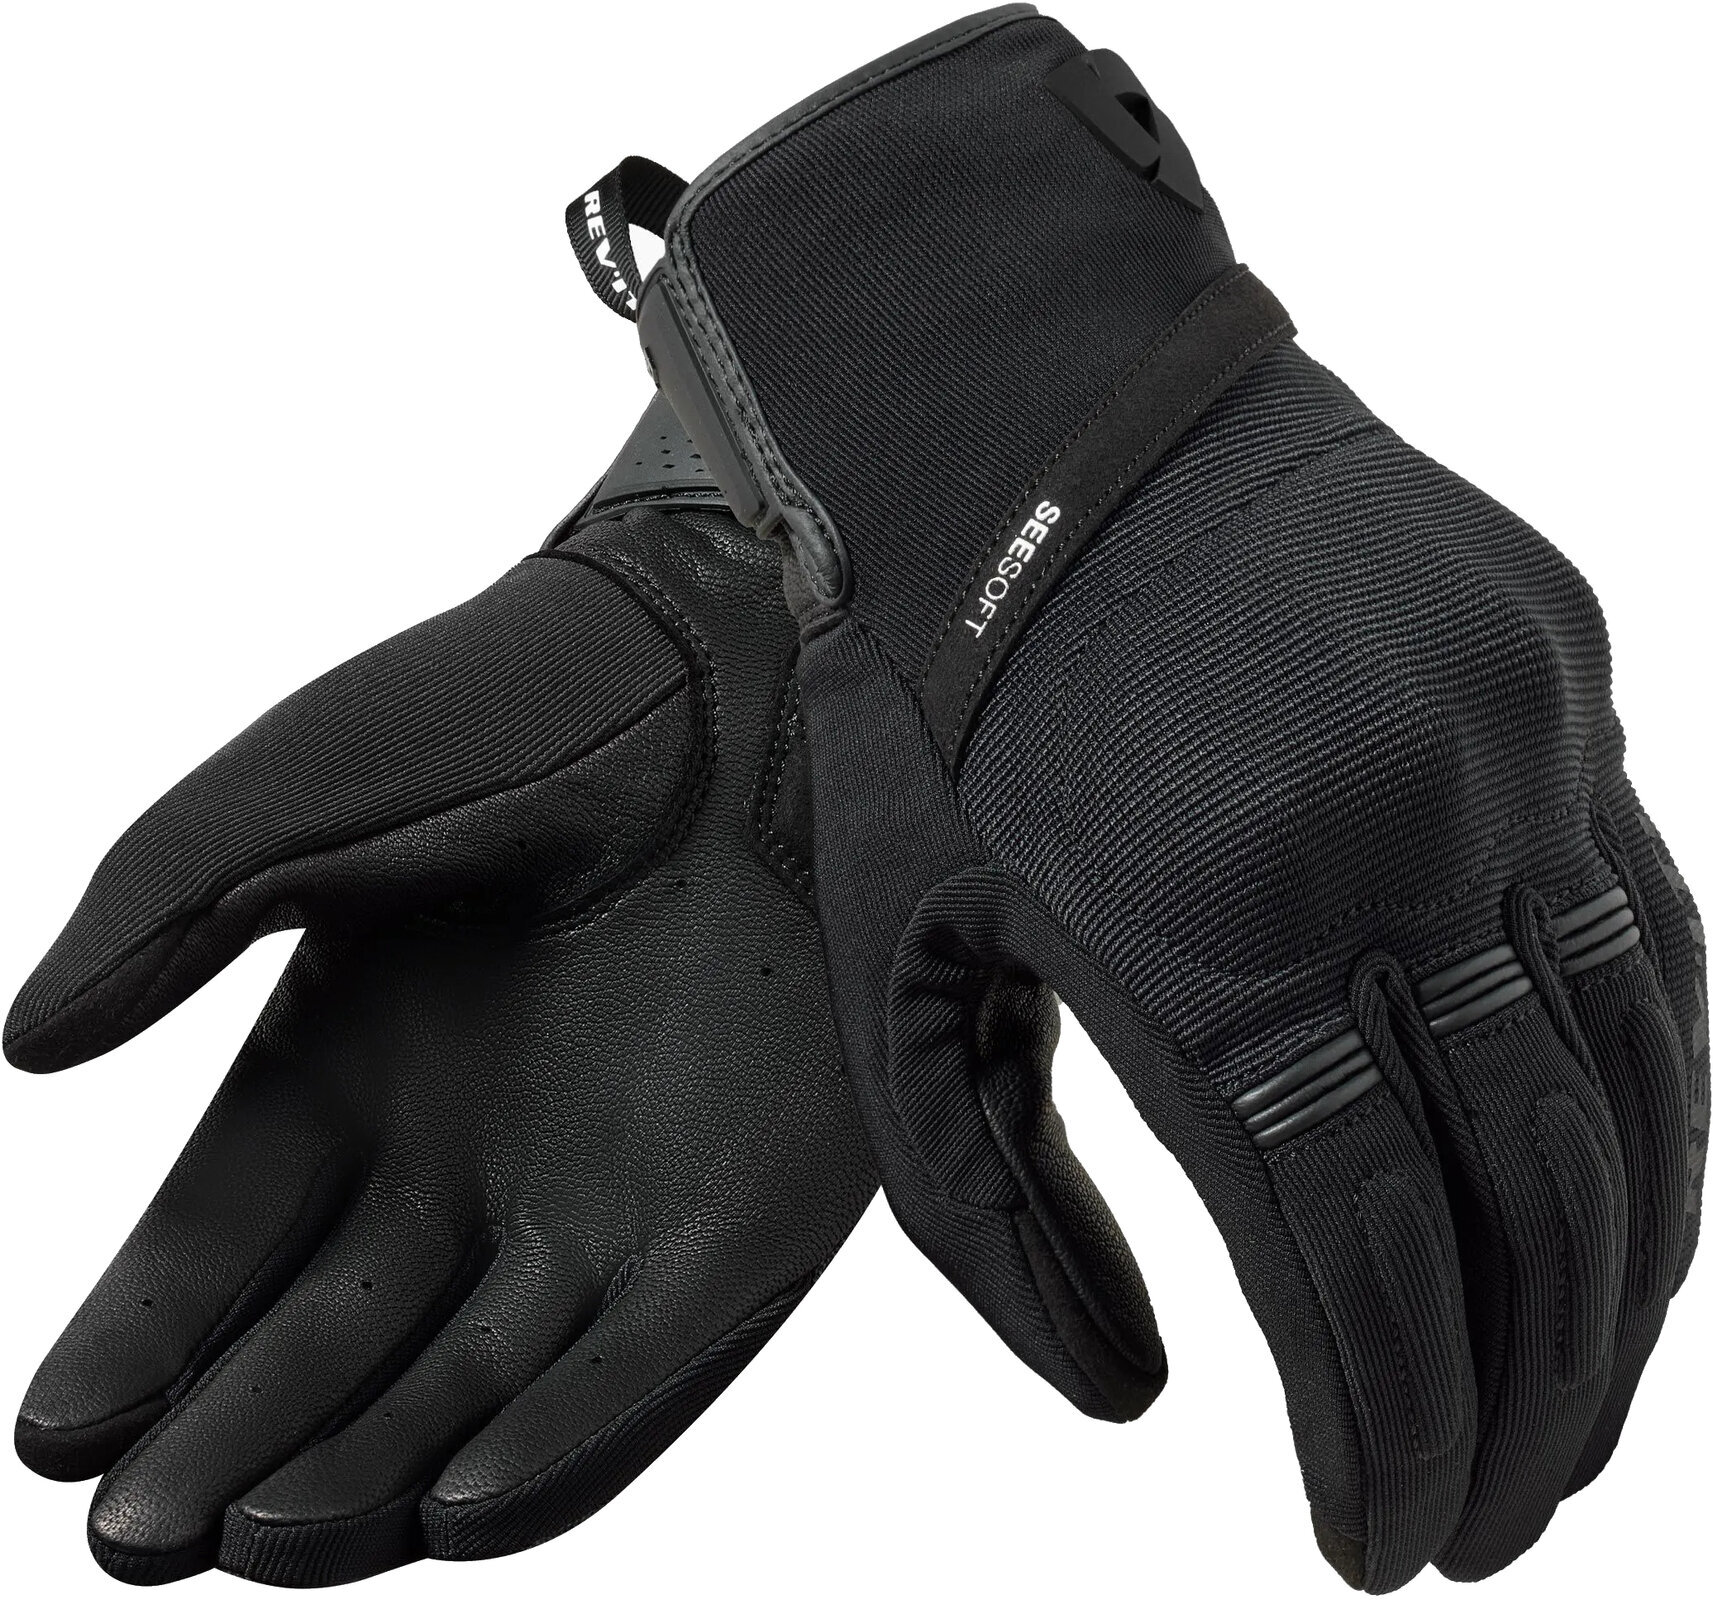 Motorcycle Gloves Rev'it! Gloves Mosca 2 Black XS Motorcycle Gloves